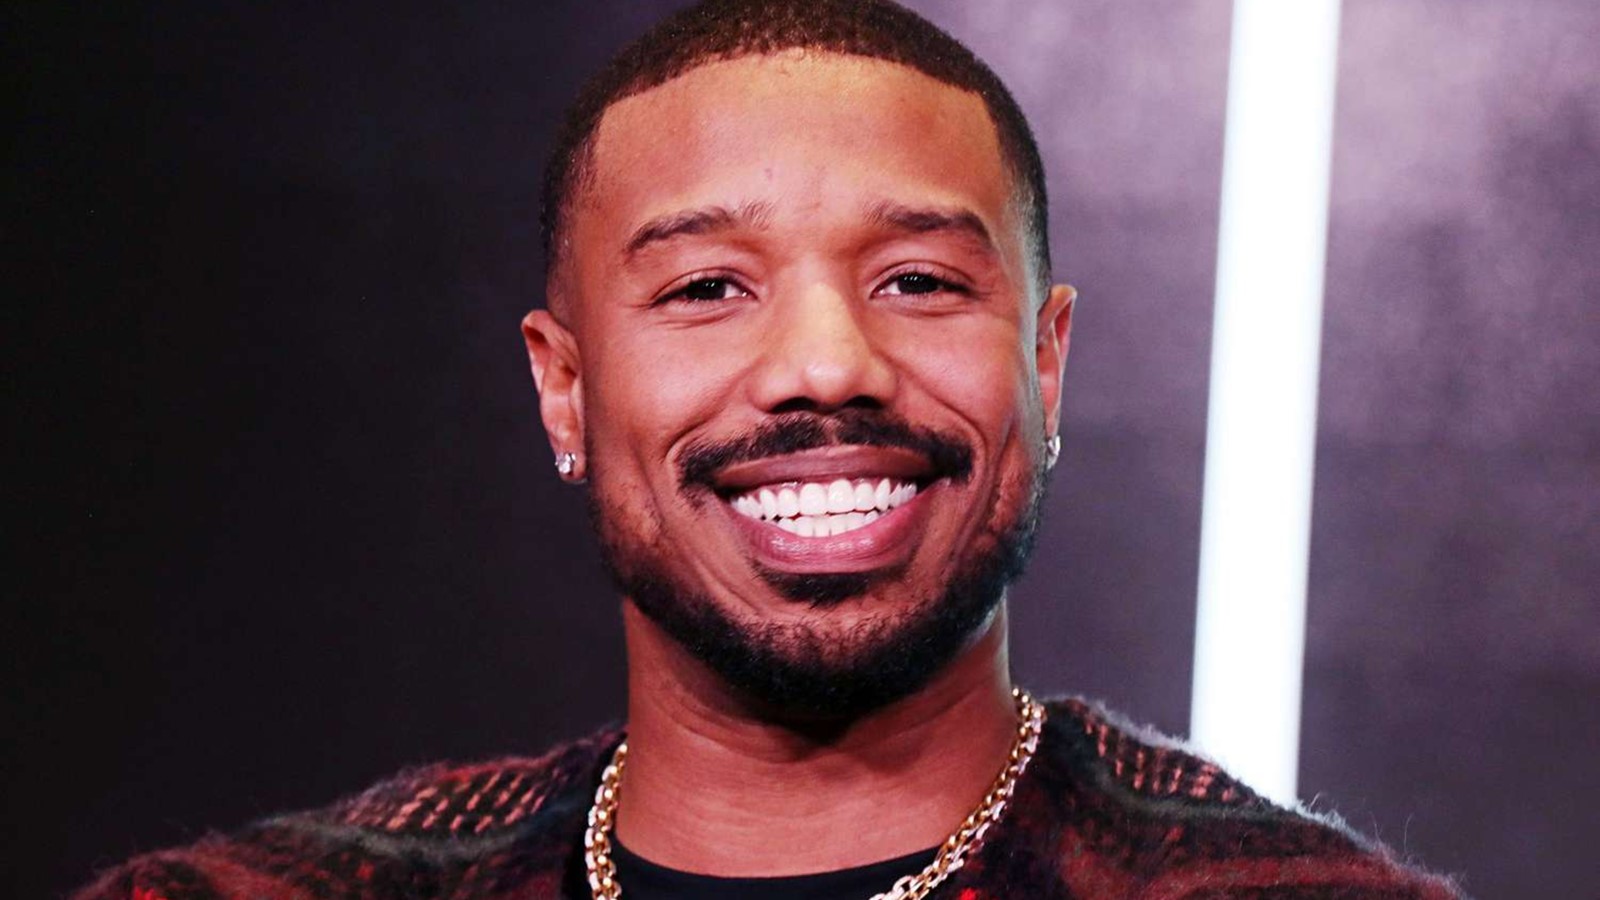 Michael B. Jordan will produce, and possibly star in, The Dwelling